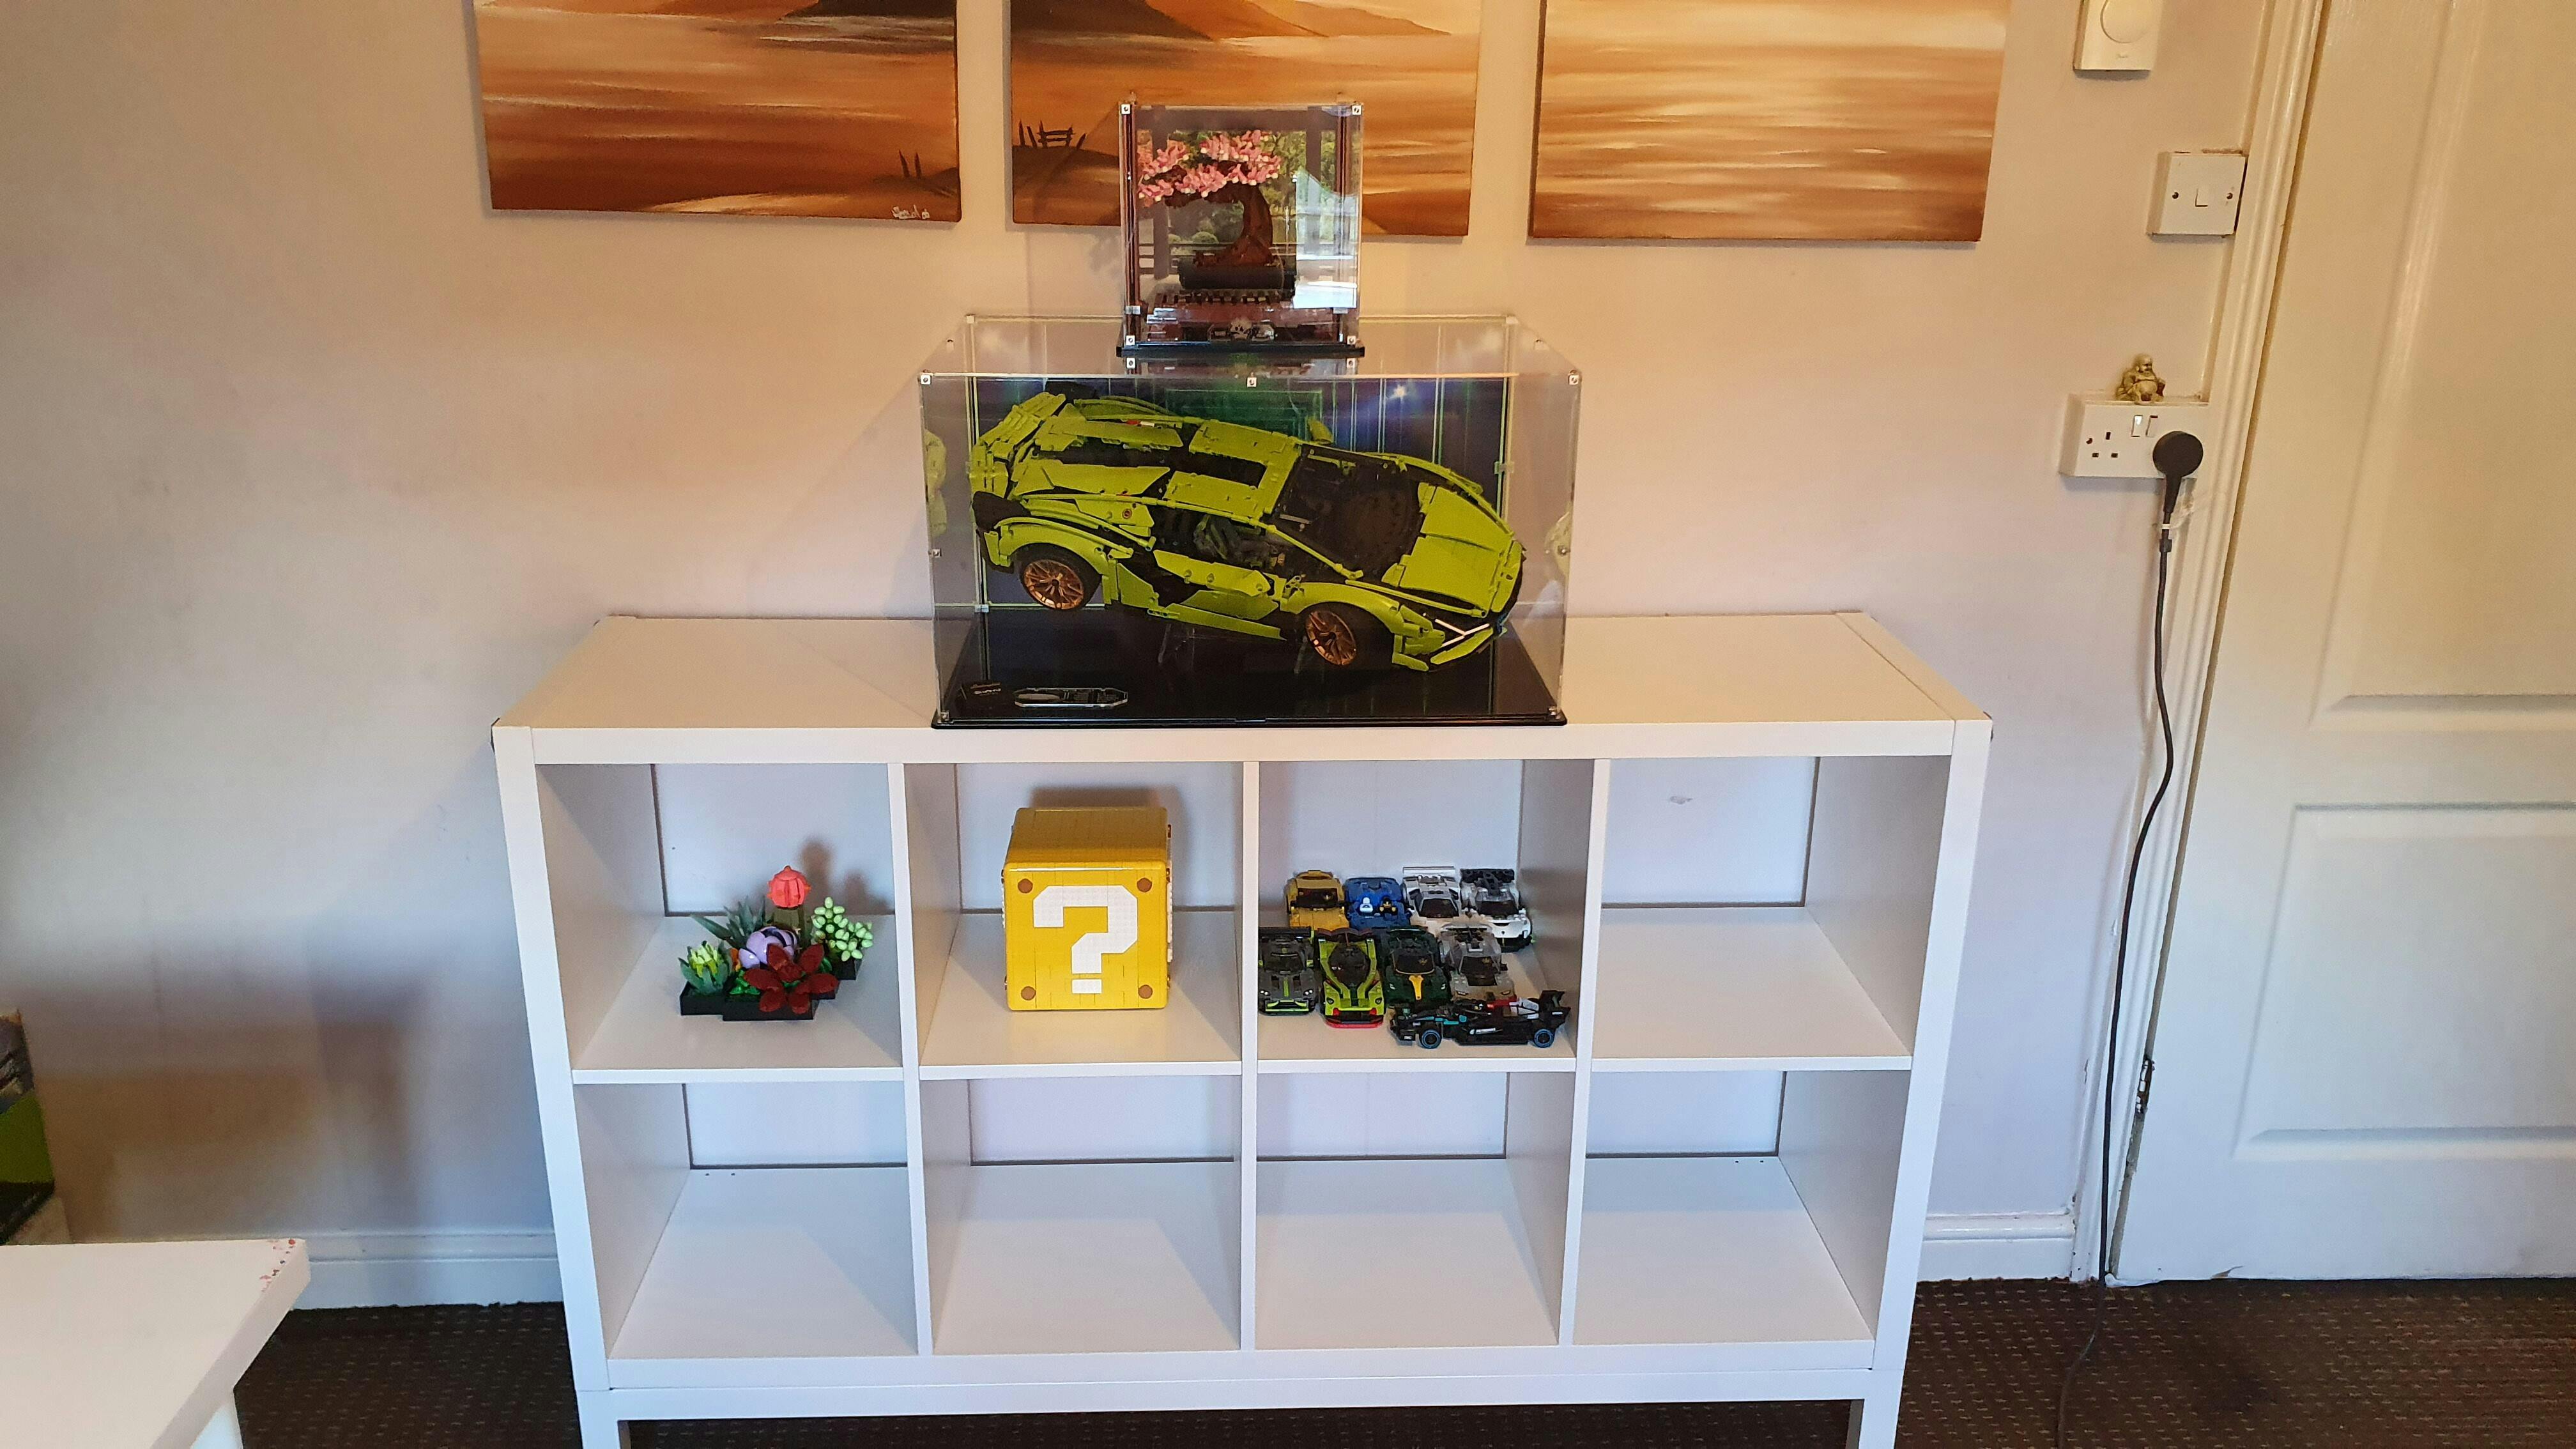 Wicked Brick review: Display solutions for Lego and other